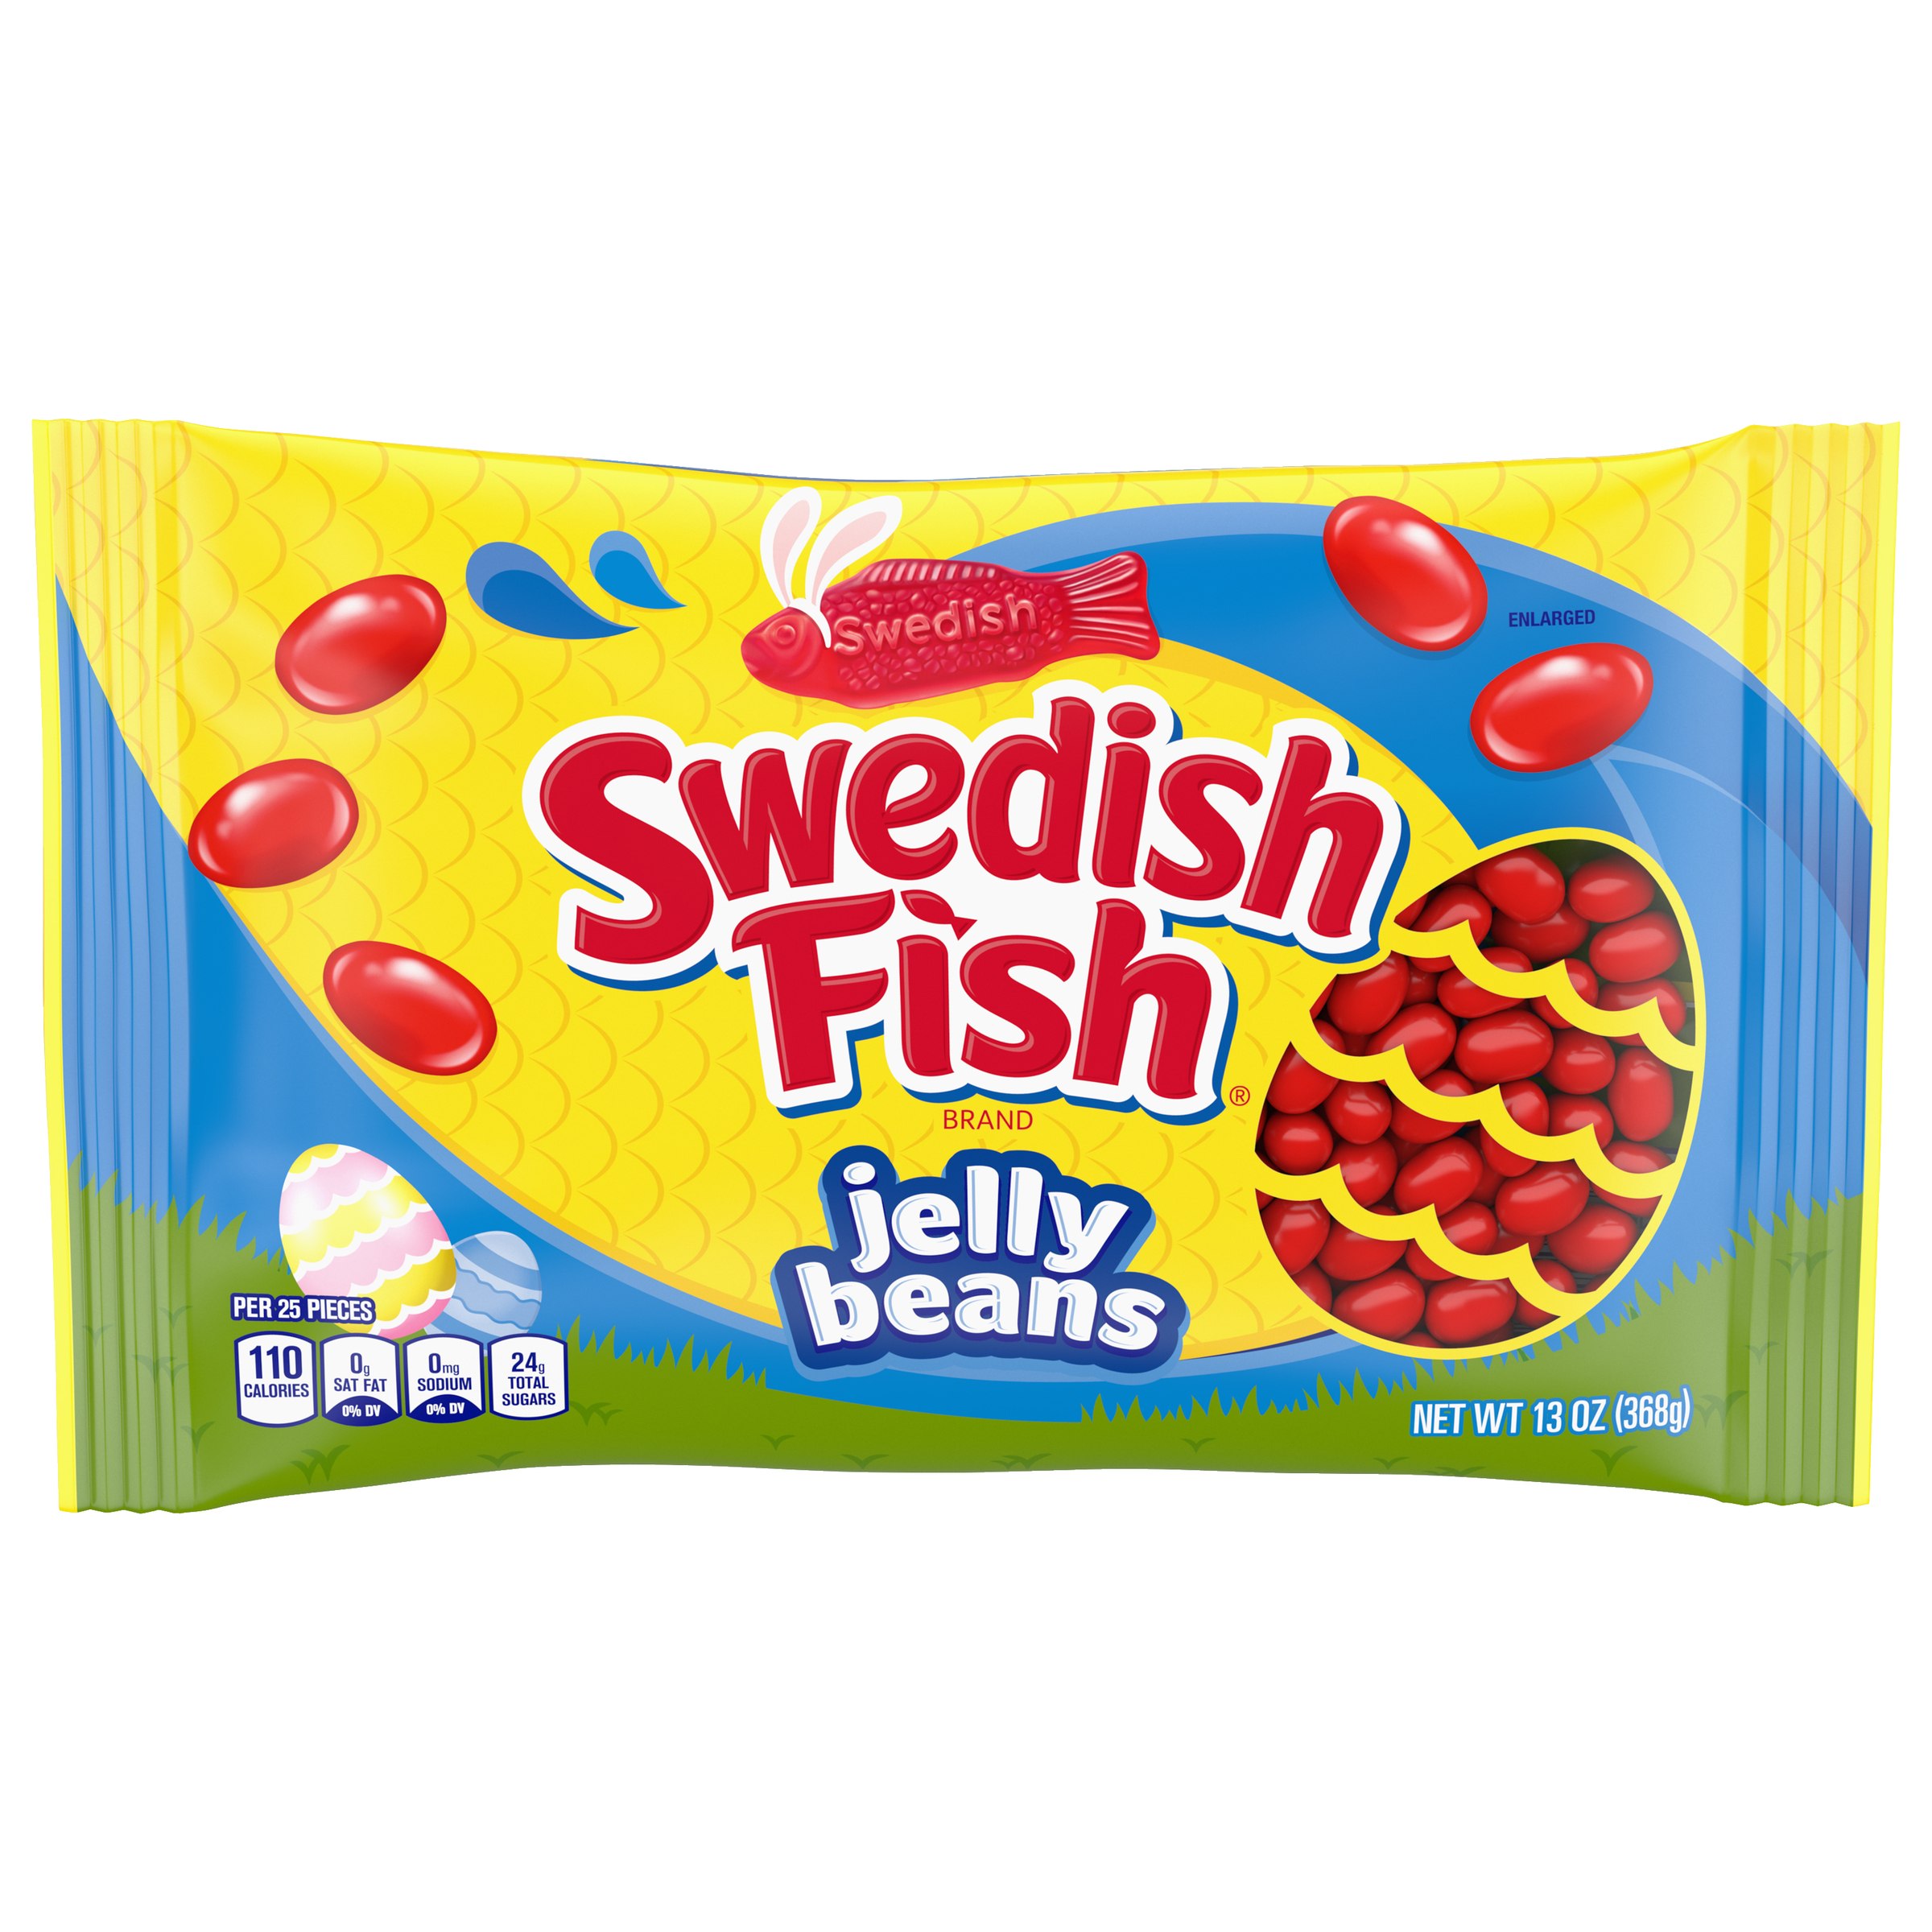 SWEDISH FISH Jelly Beans Easter Candy, 13 oz